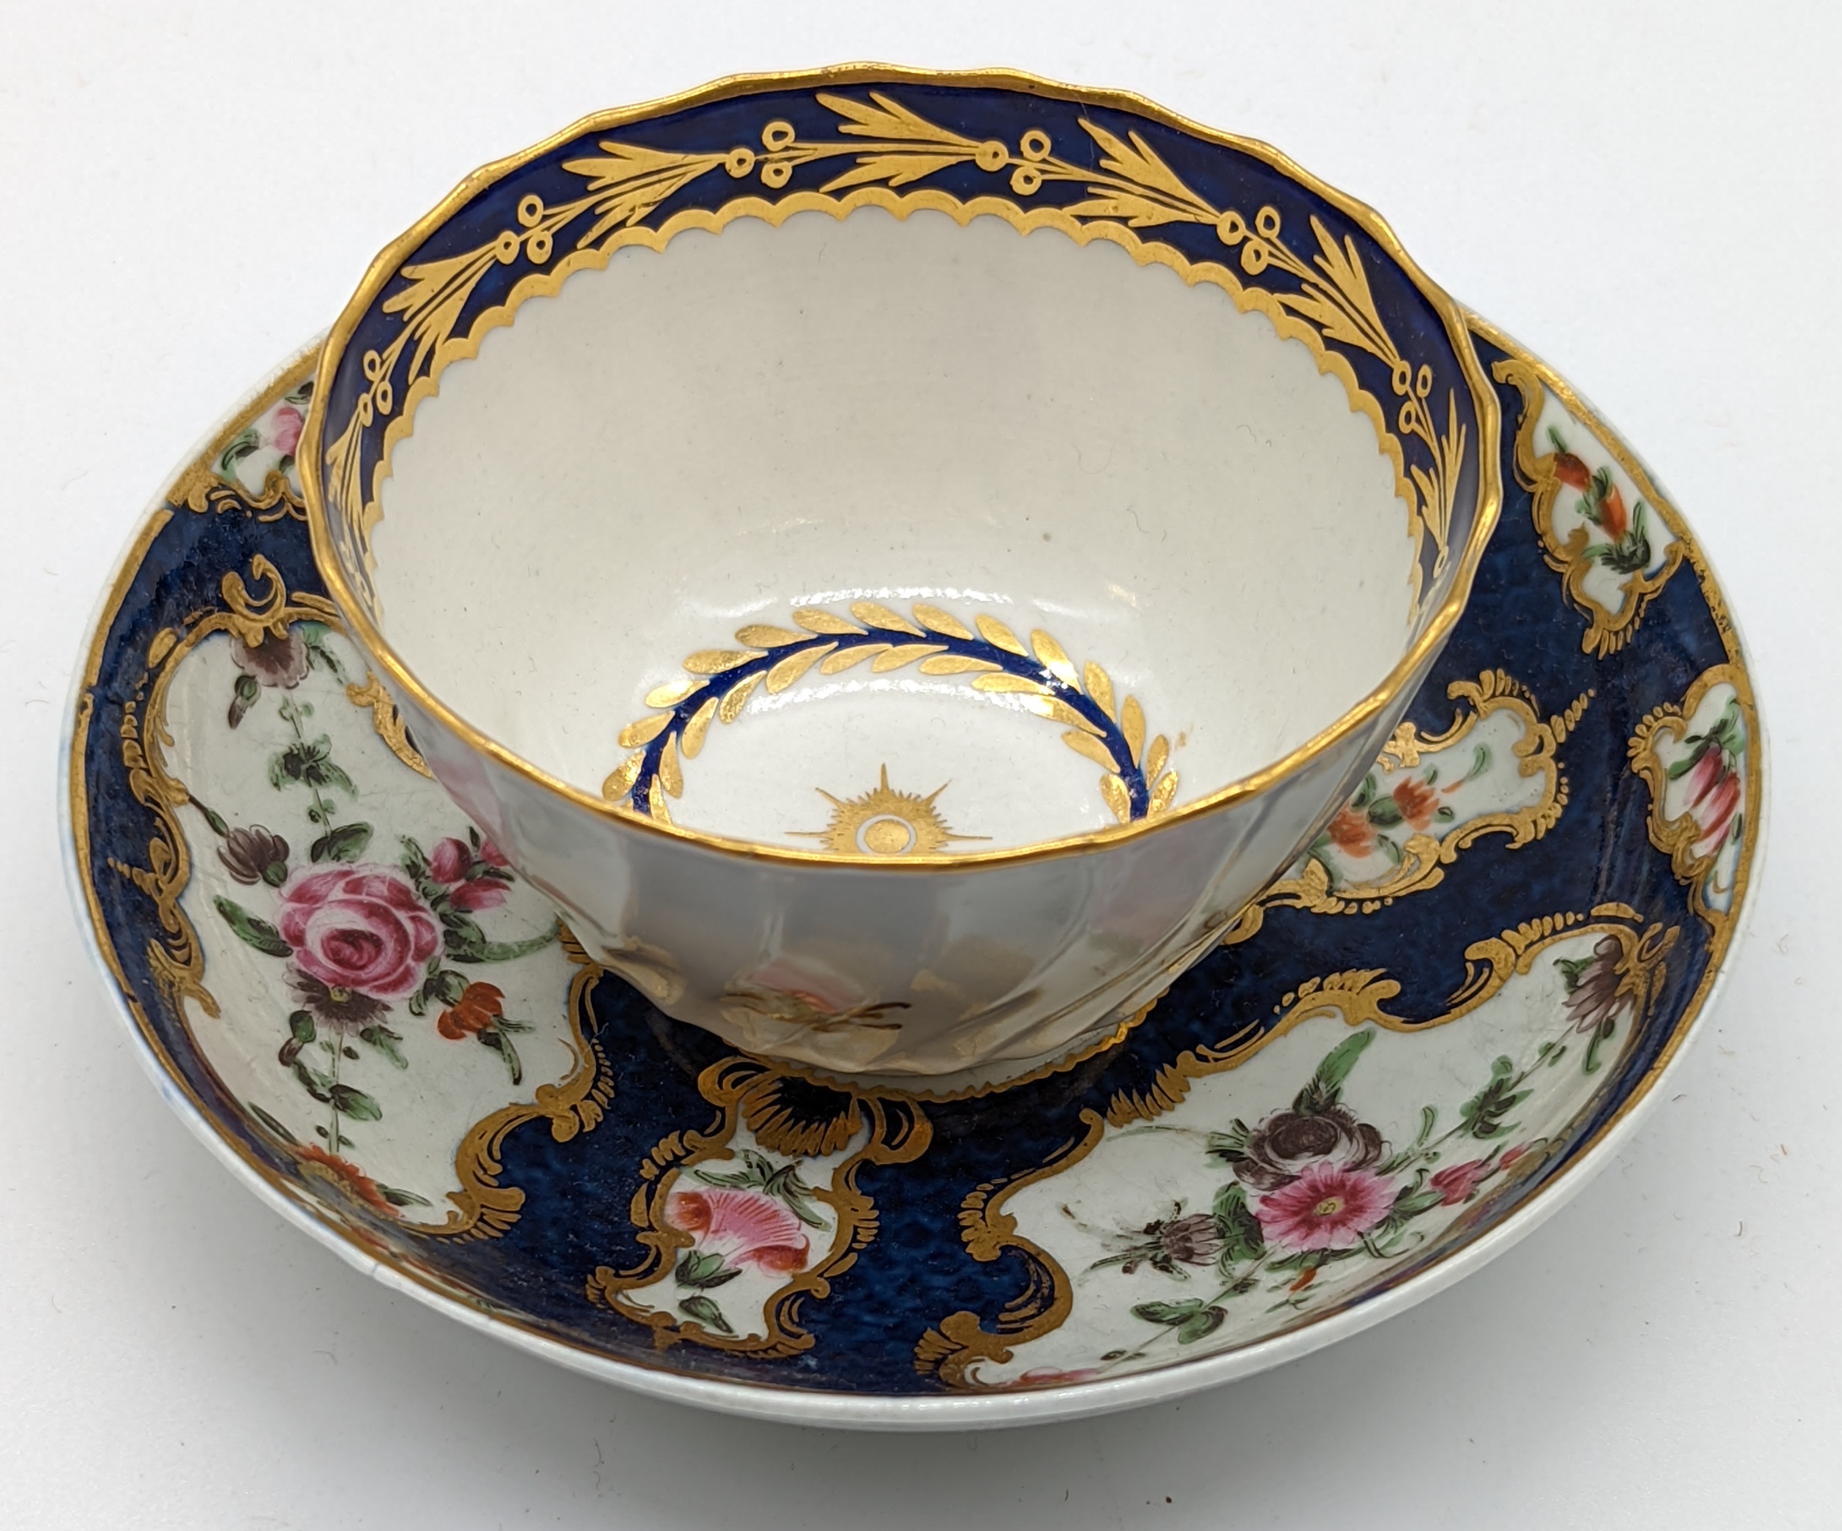 An 18th century Worcester cup and saucer, navy moon to base of both pieces